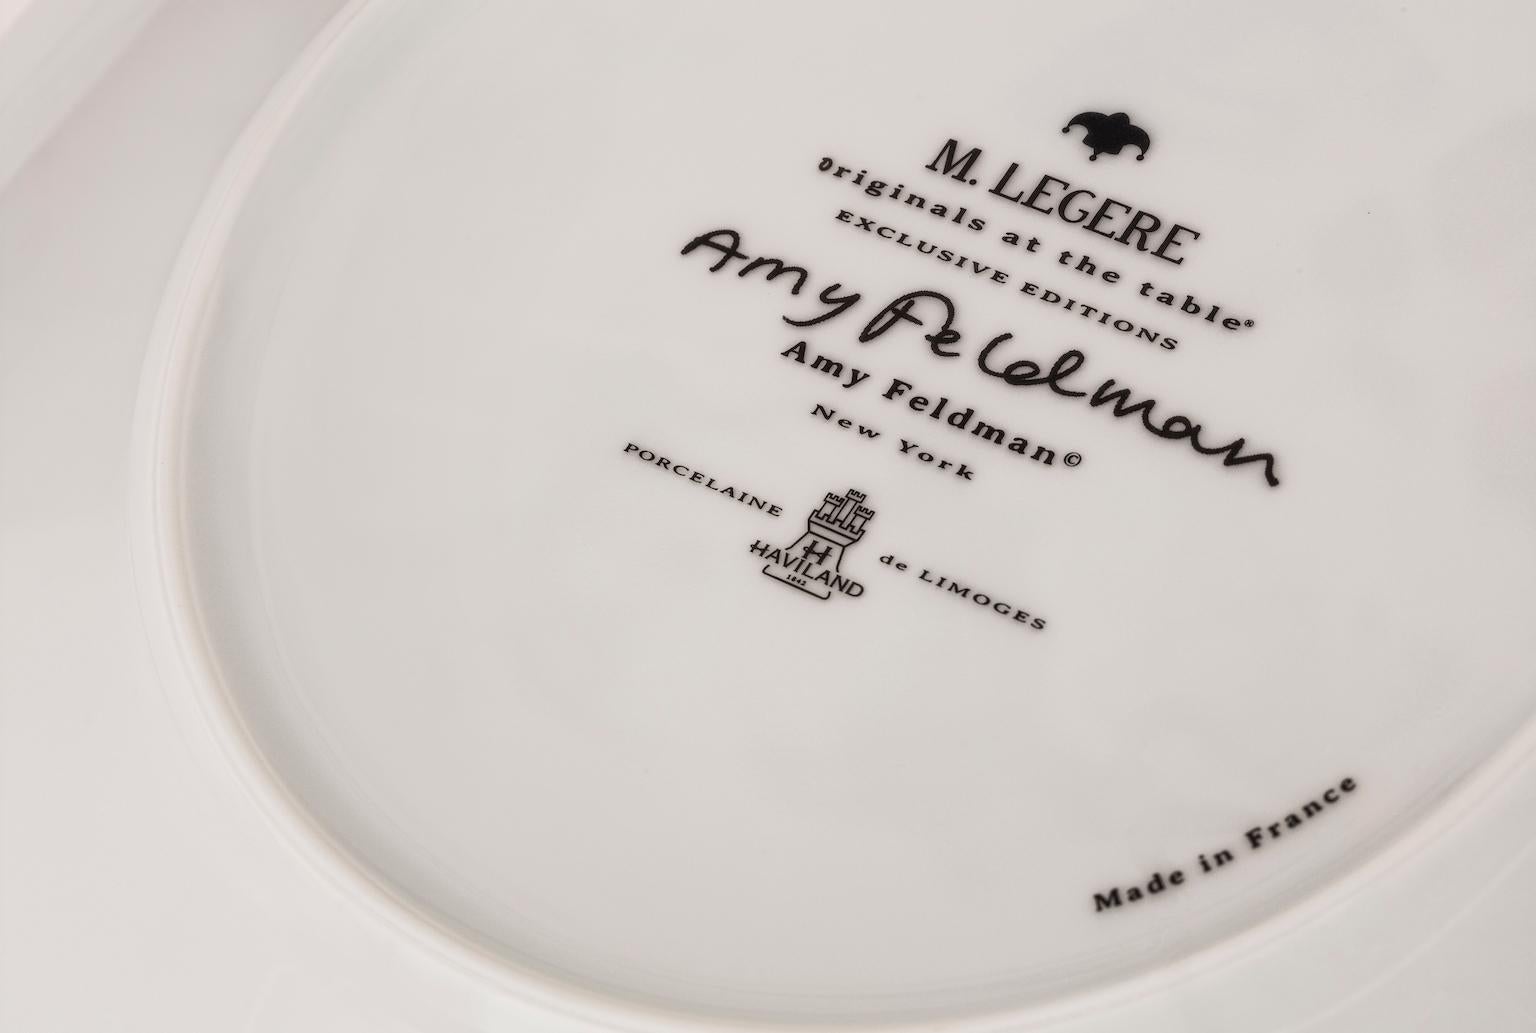 This uniquely styled Limoges white porcelain deep bowl featuring silvery gray and inky black colors and free-flowing design was rendered exclusively for M.Legere by Brooklyn NYC female abstract Artist Amy Feldman and is dishwater safe. Haviland,